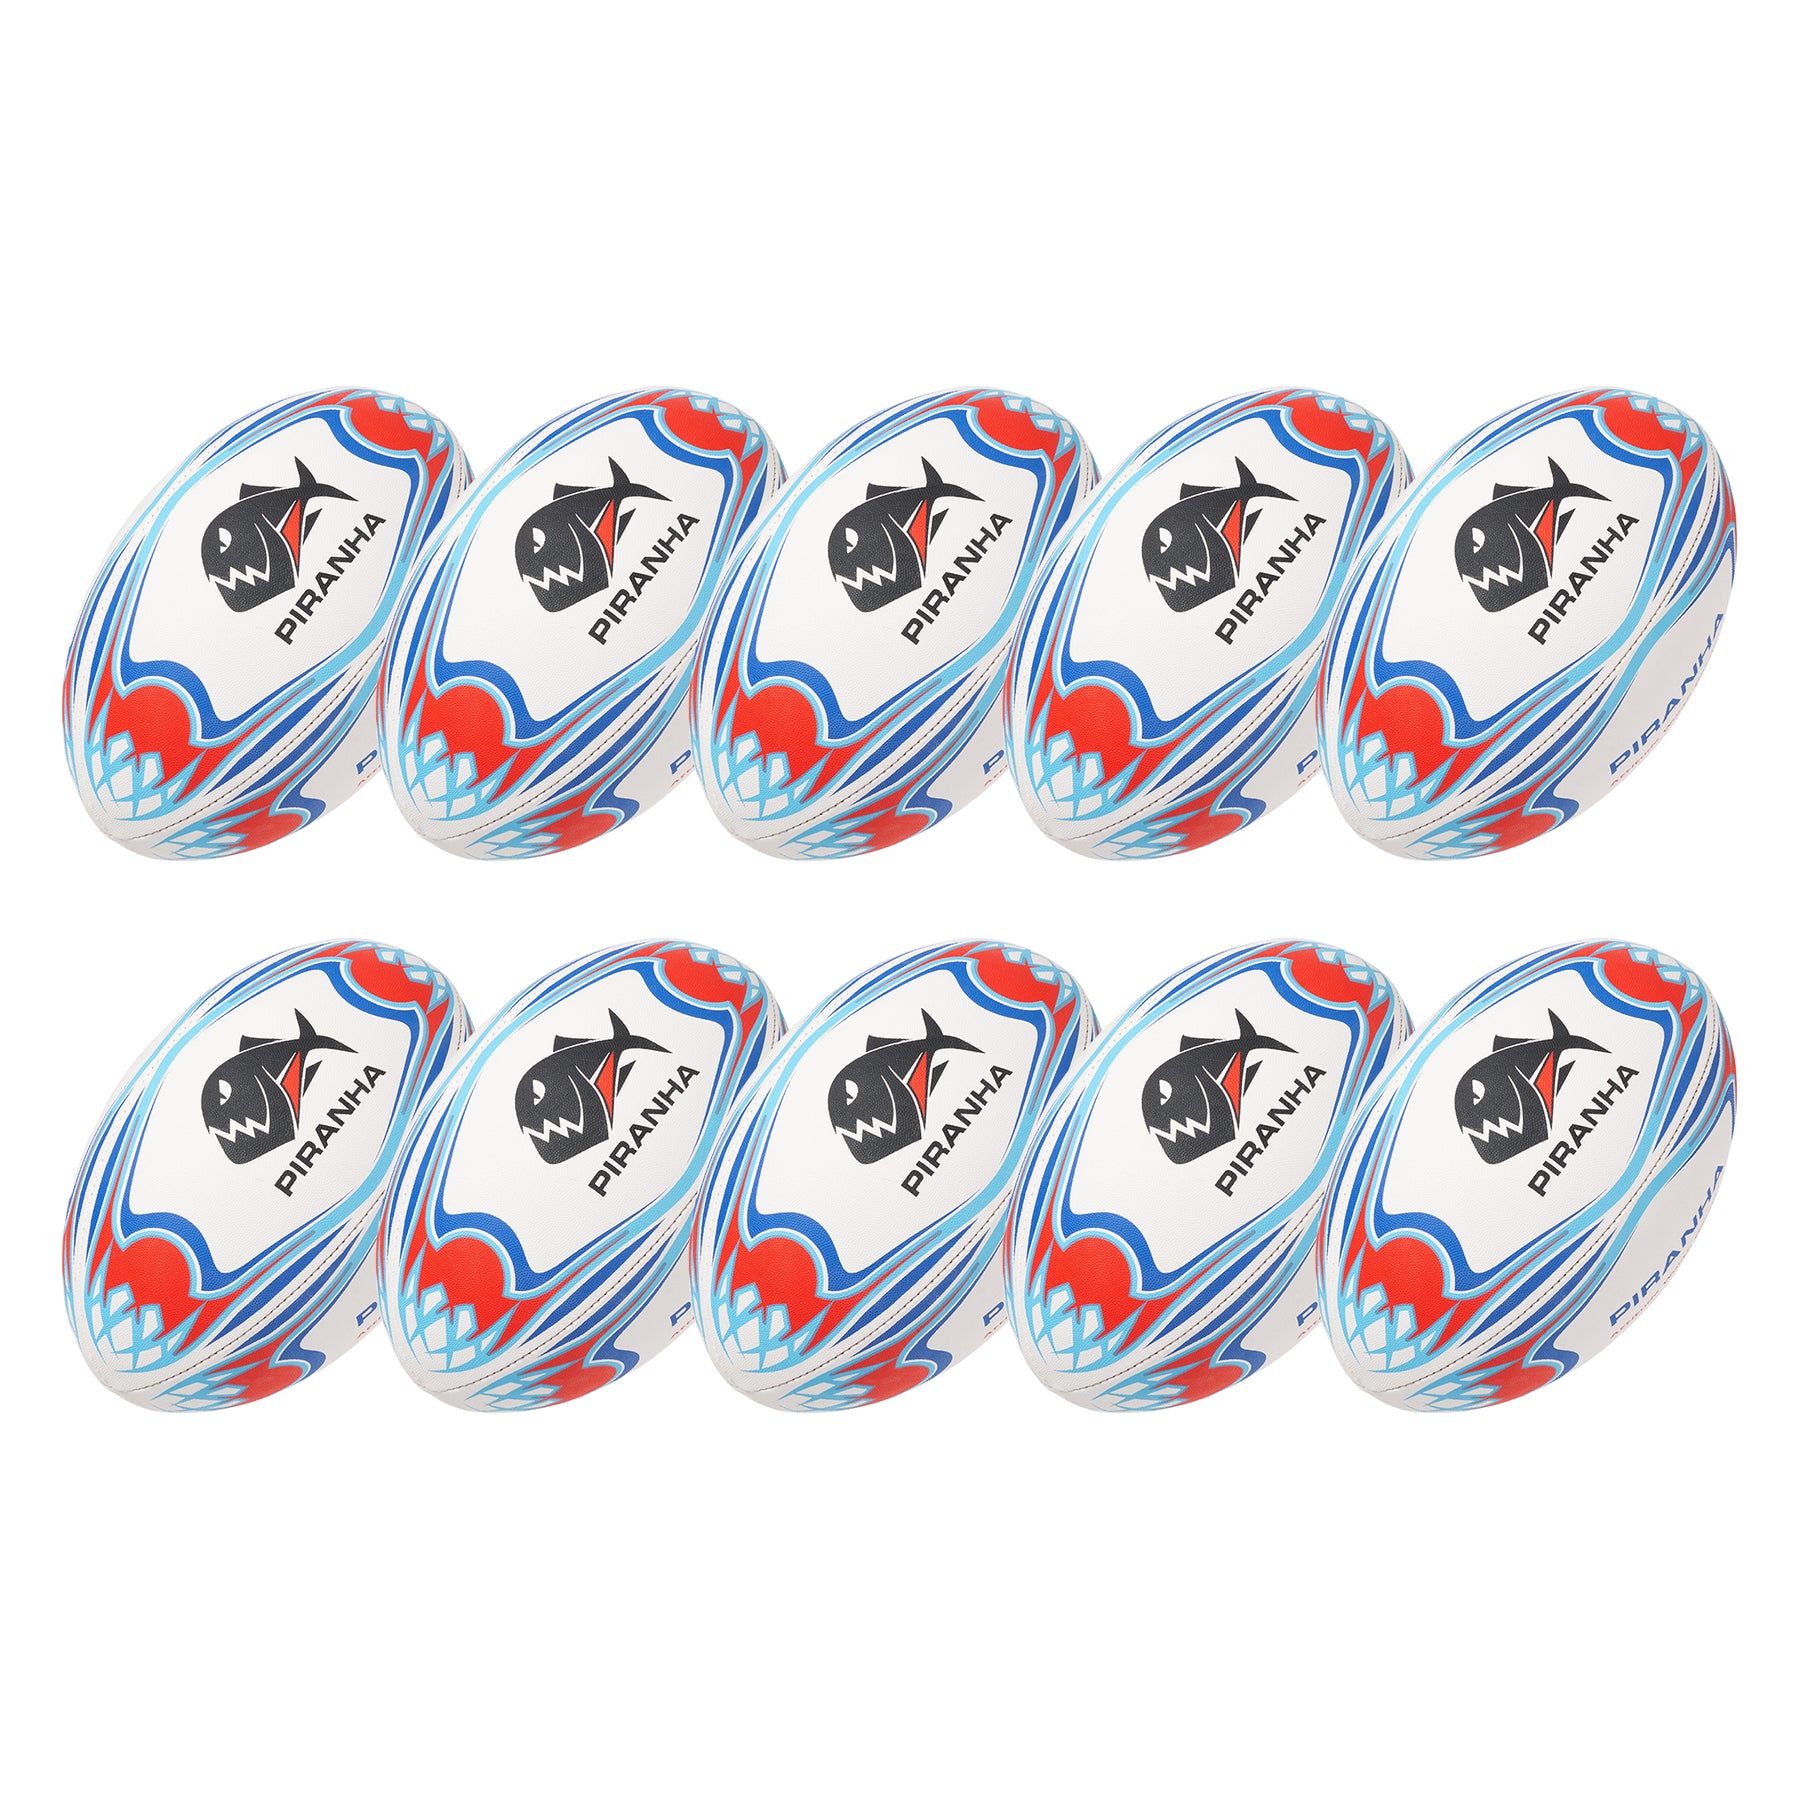 Piranha Cariba Rugby Ball Size 5 (Pack of 10)